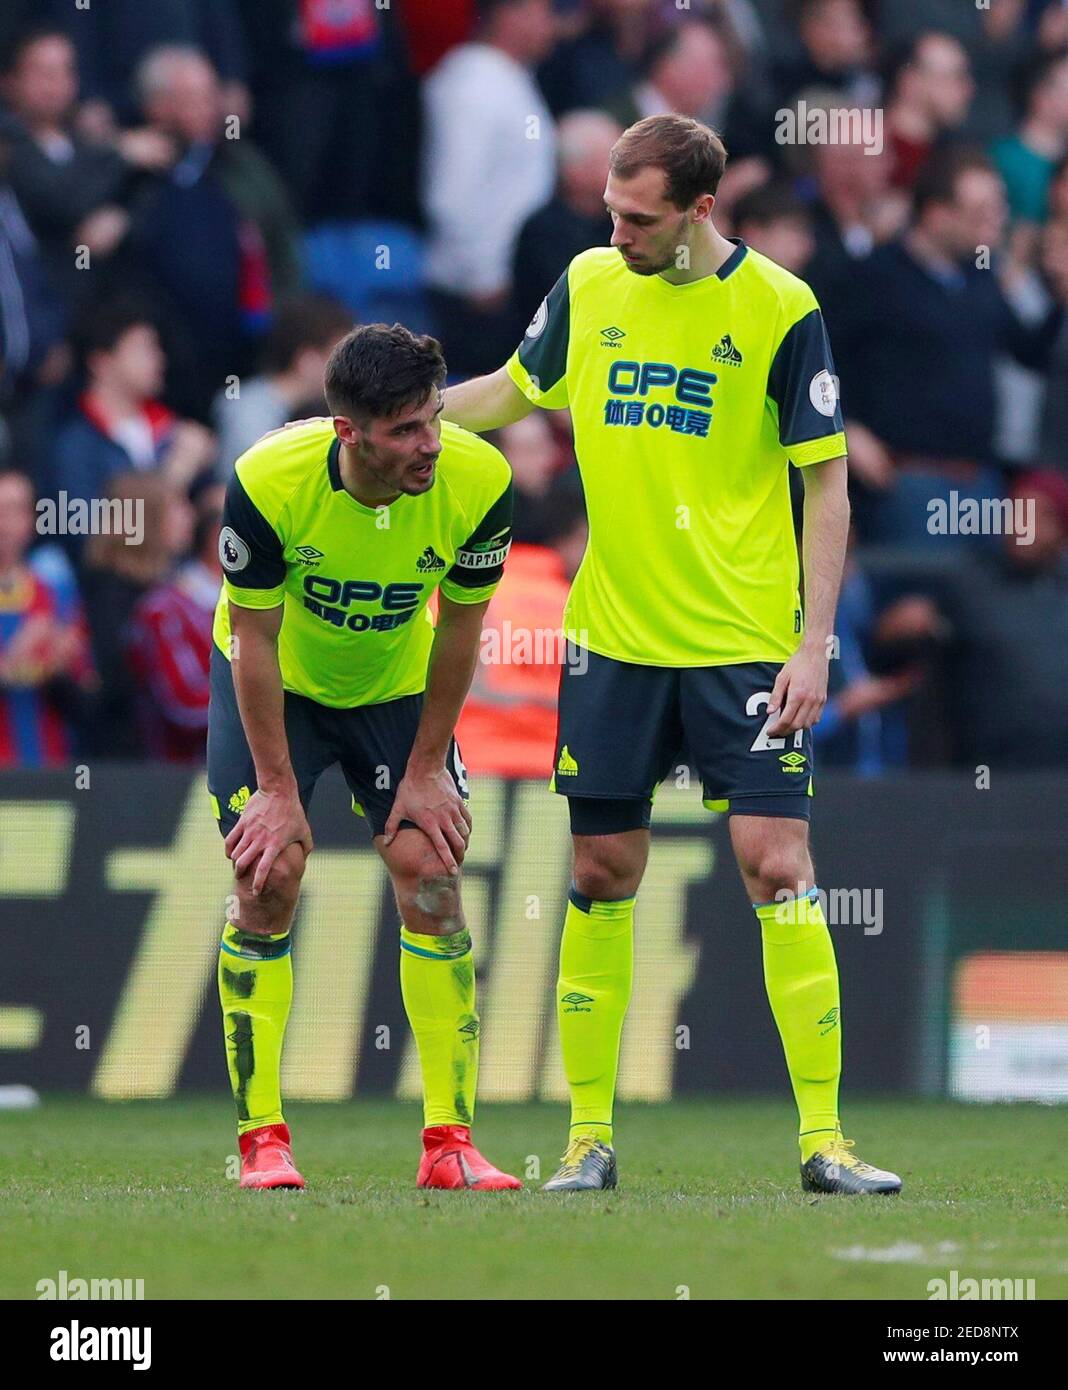 Soccer Football - Premier League - Crystal Palace v Huddersfield Town - Selhurst Park, London, Britain - March 30, 2019  Huddersfield Town's Christopher Schindler and Jon Gorenc Stankovic look dejected after the match as they are relegated from the Premier League   Action Images via Reuters/Andrew Couldridge  EDITORIAL USE ONLY. No use with unauthorized audio, video, data, fixture lists, club/league logos or 'live' services. Online in-match use limited to 75 images, no video emulation. No use in betting, games or single club/league/player publications.  Please contact your account representati Stock Photo